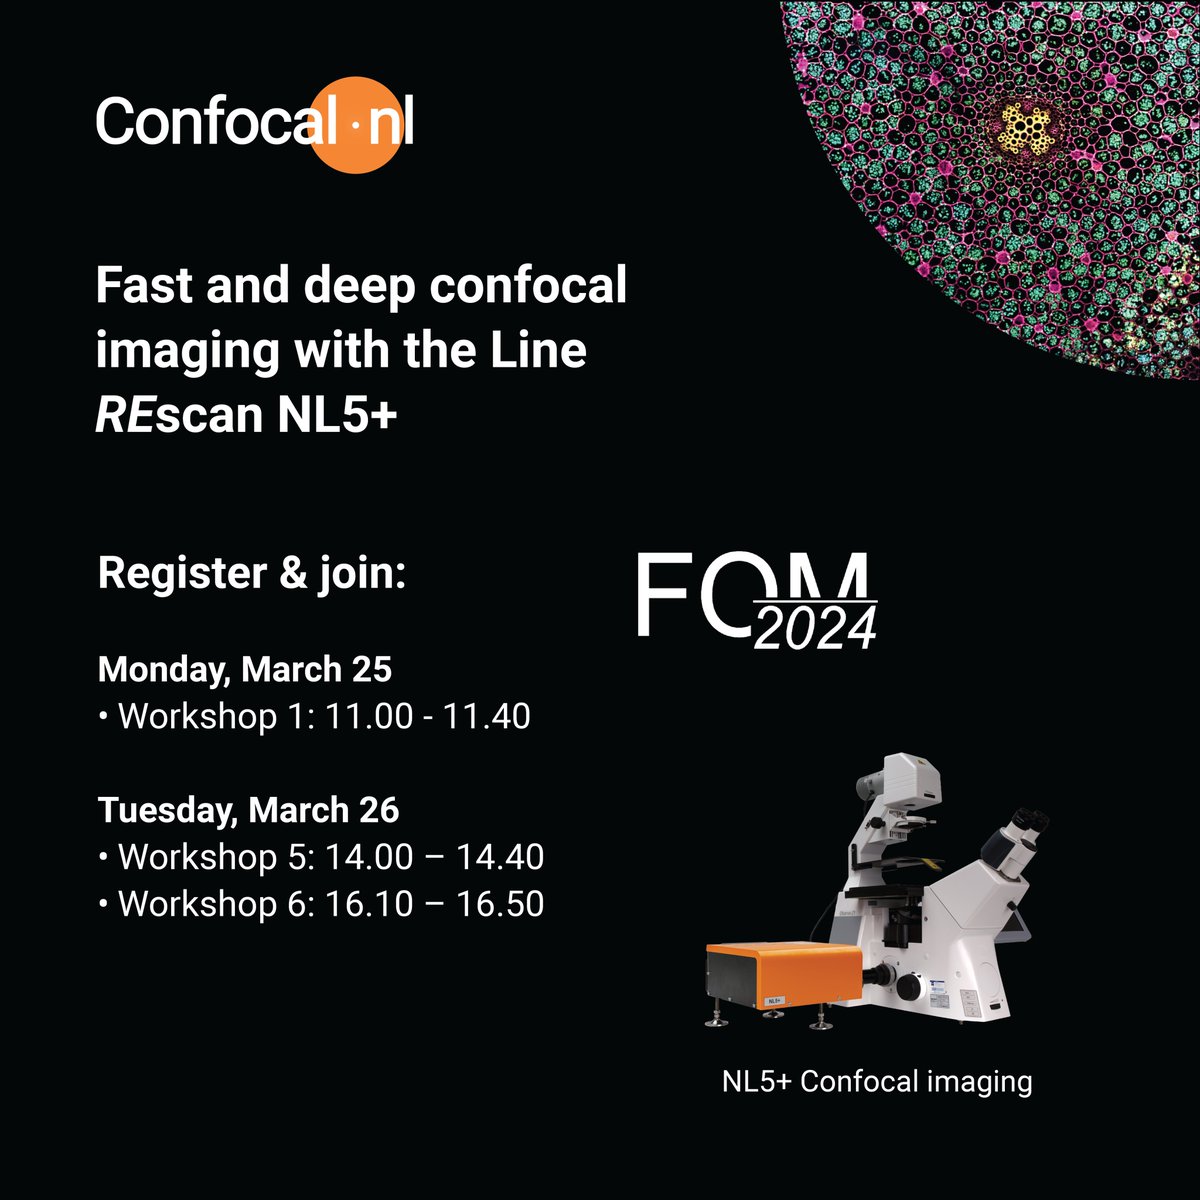 Are you attending #FOM2024? Register for our workshops and discover the cell-friendly confocal and super resolution imaging. Register here: confocal.nl/fom2024worksho… Looking forward to meeting you there!